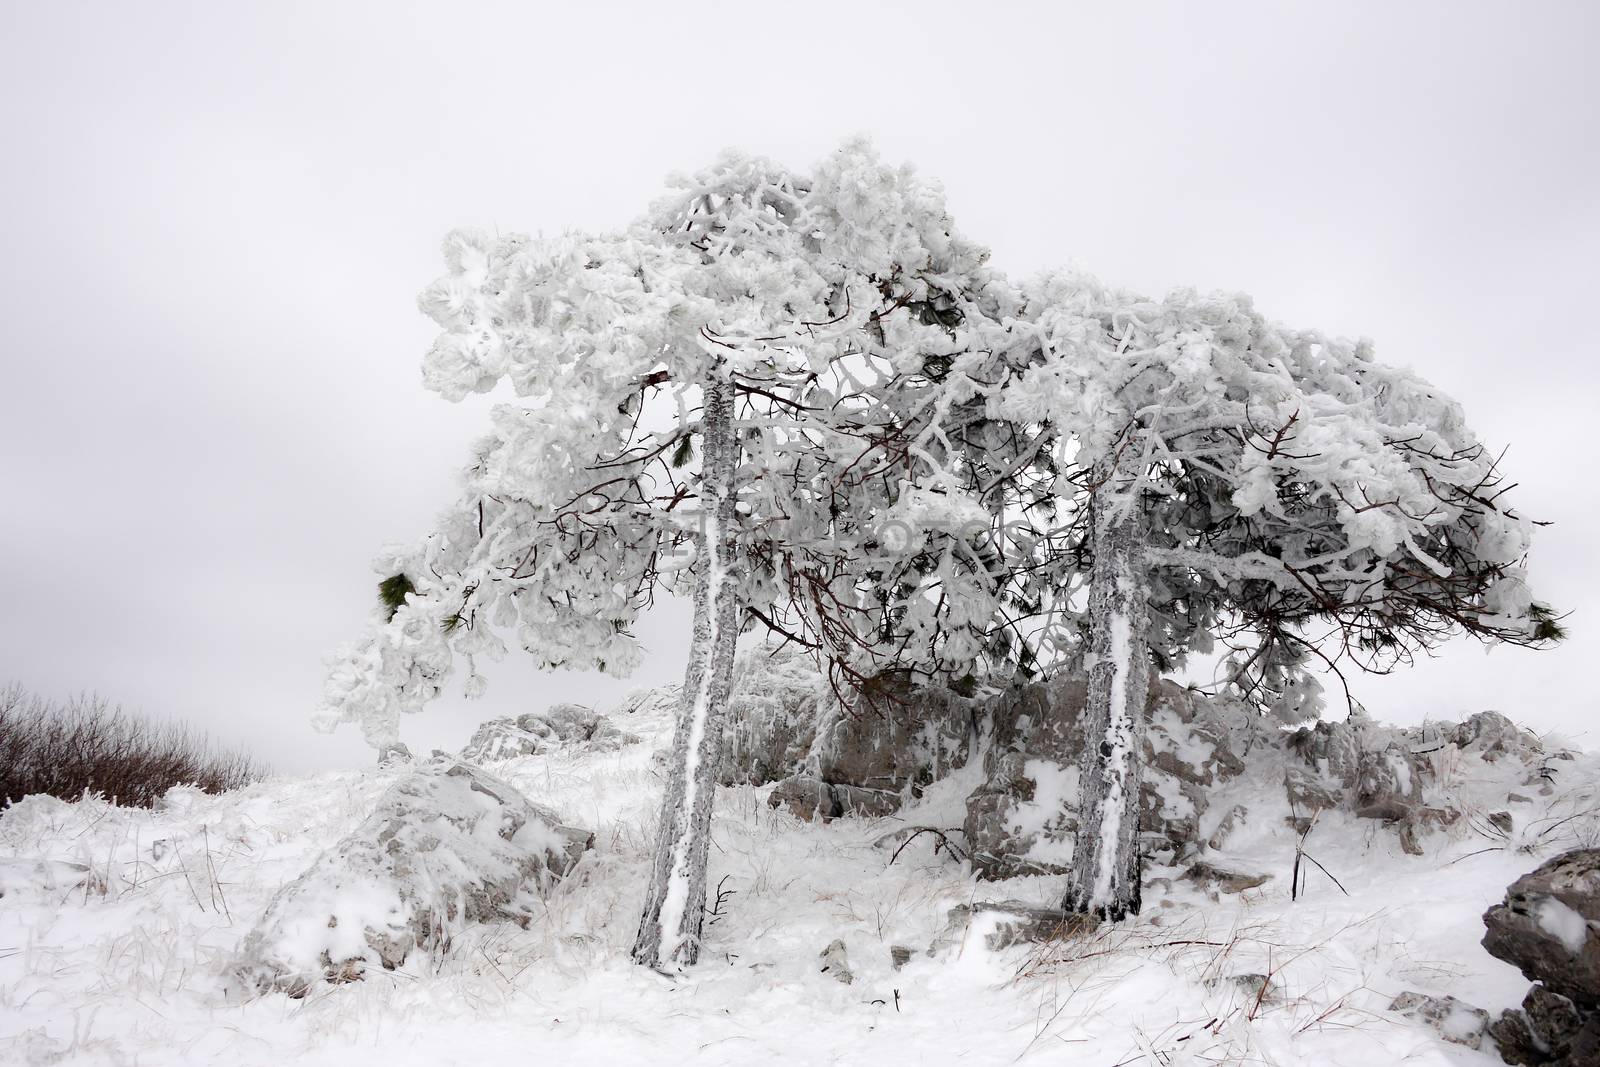 A couple of pines covered in a thick layer of ice with snowy branches. Overcast atmosphere and frozen snow landscape in the mountains in a harsh winter environment.